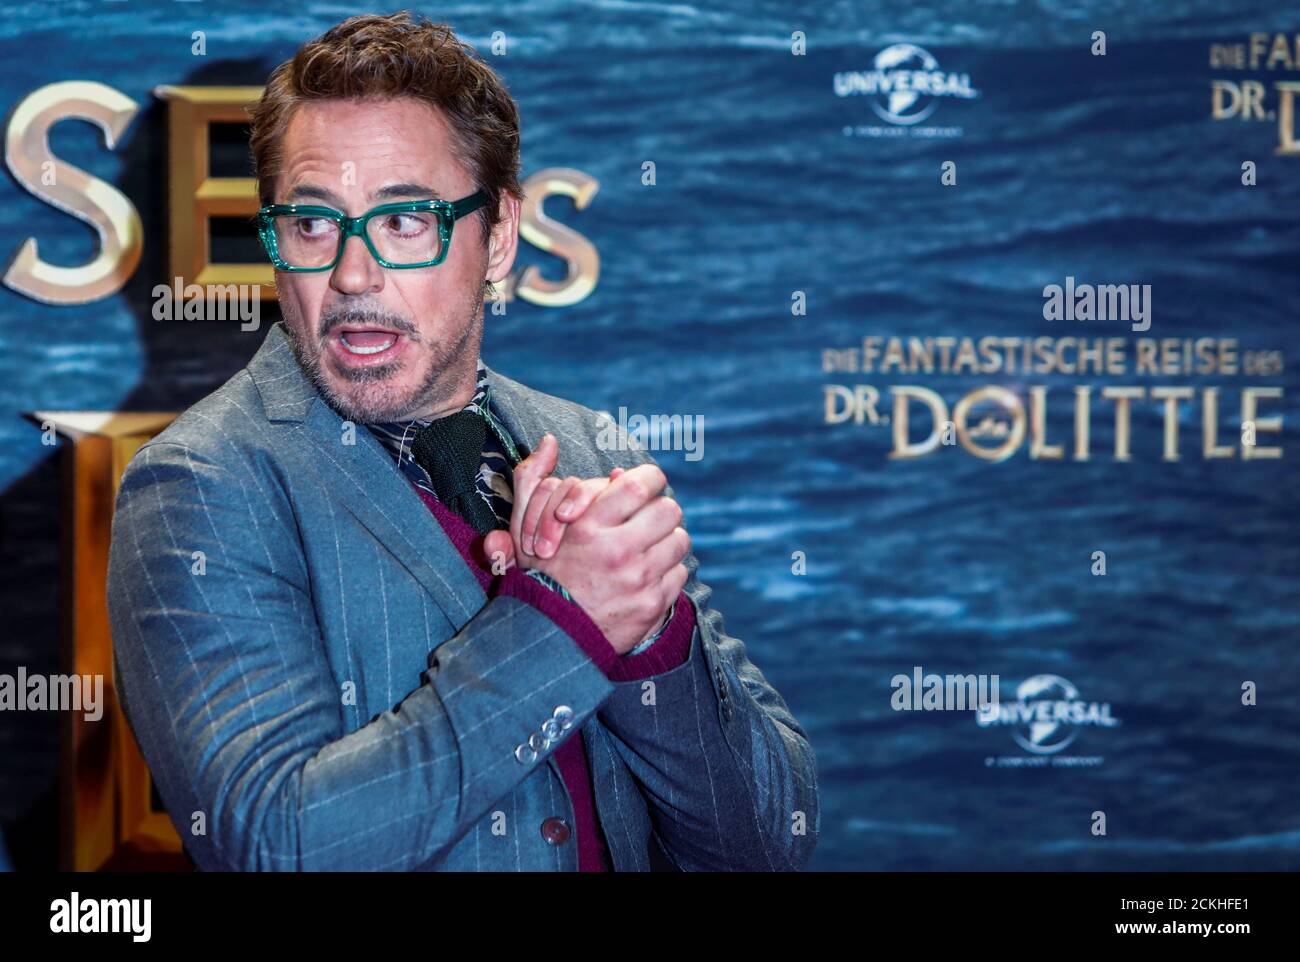 Cast member, Robert Downey Jr. attends the premiere of the 'The Voyage of Doctor Dolittle' in Berlin, Germany January 19, 2020. REUTERS/Michele Tantussi Stock Photo